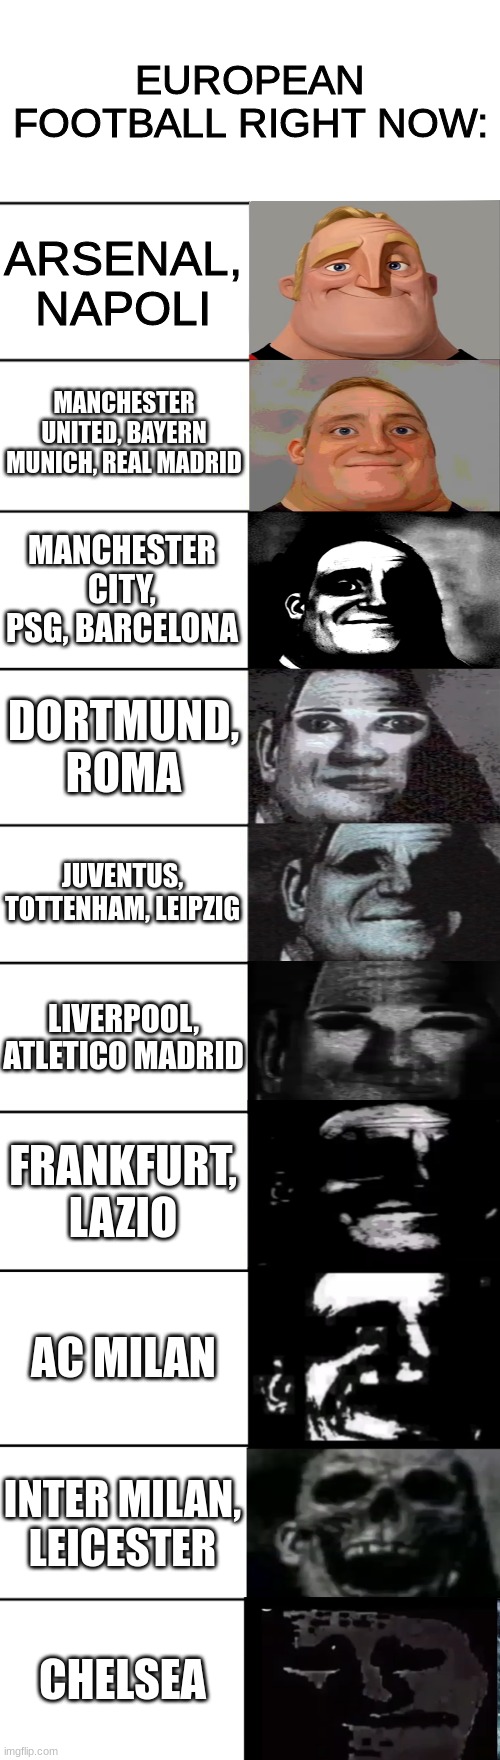 any chelsea fan right now must have be doing a depression because they are just trash... | EUROPEAN FOOTBALL RIGHT NOW:; ARSENAL, NAPOLI; MANCHESTER UNITED, BAYERN MUNICH, REAL MADRID; MANCHESTER CITY, PSG, BARCELONA; DORTMUND, ROMA; JUVENTUS, TOTTENHAM, LEIPZIG; LIVERPOOL, ATLETICO MADRID; FRANKFURT, LAZIO; AC MILAN; INTER MILAN, LEICESTER; CHELSEA | image tagged in mr incredible becoming uncanny | made w/ Imgflip meme maker